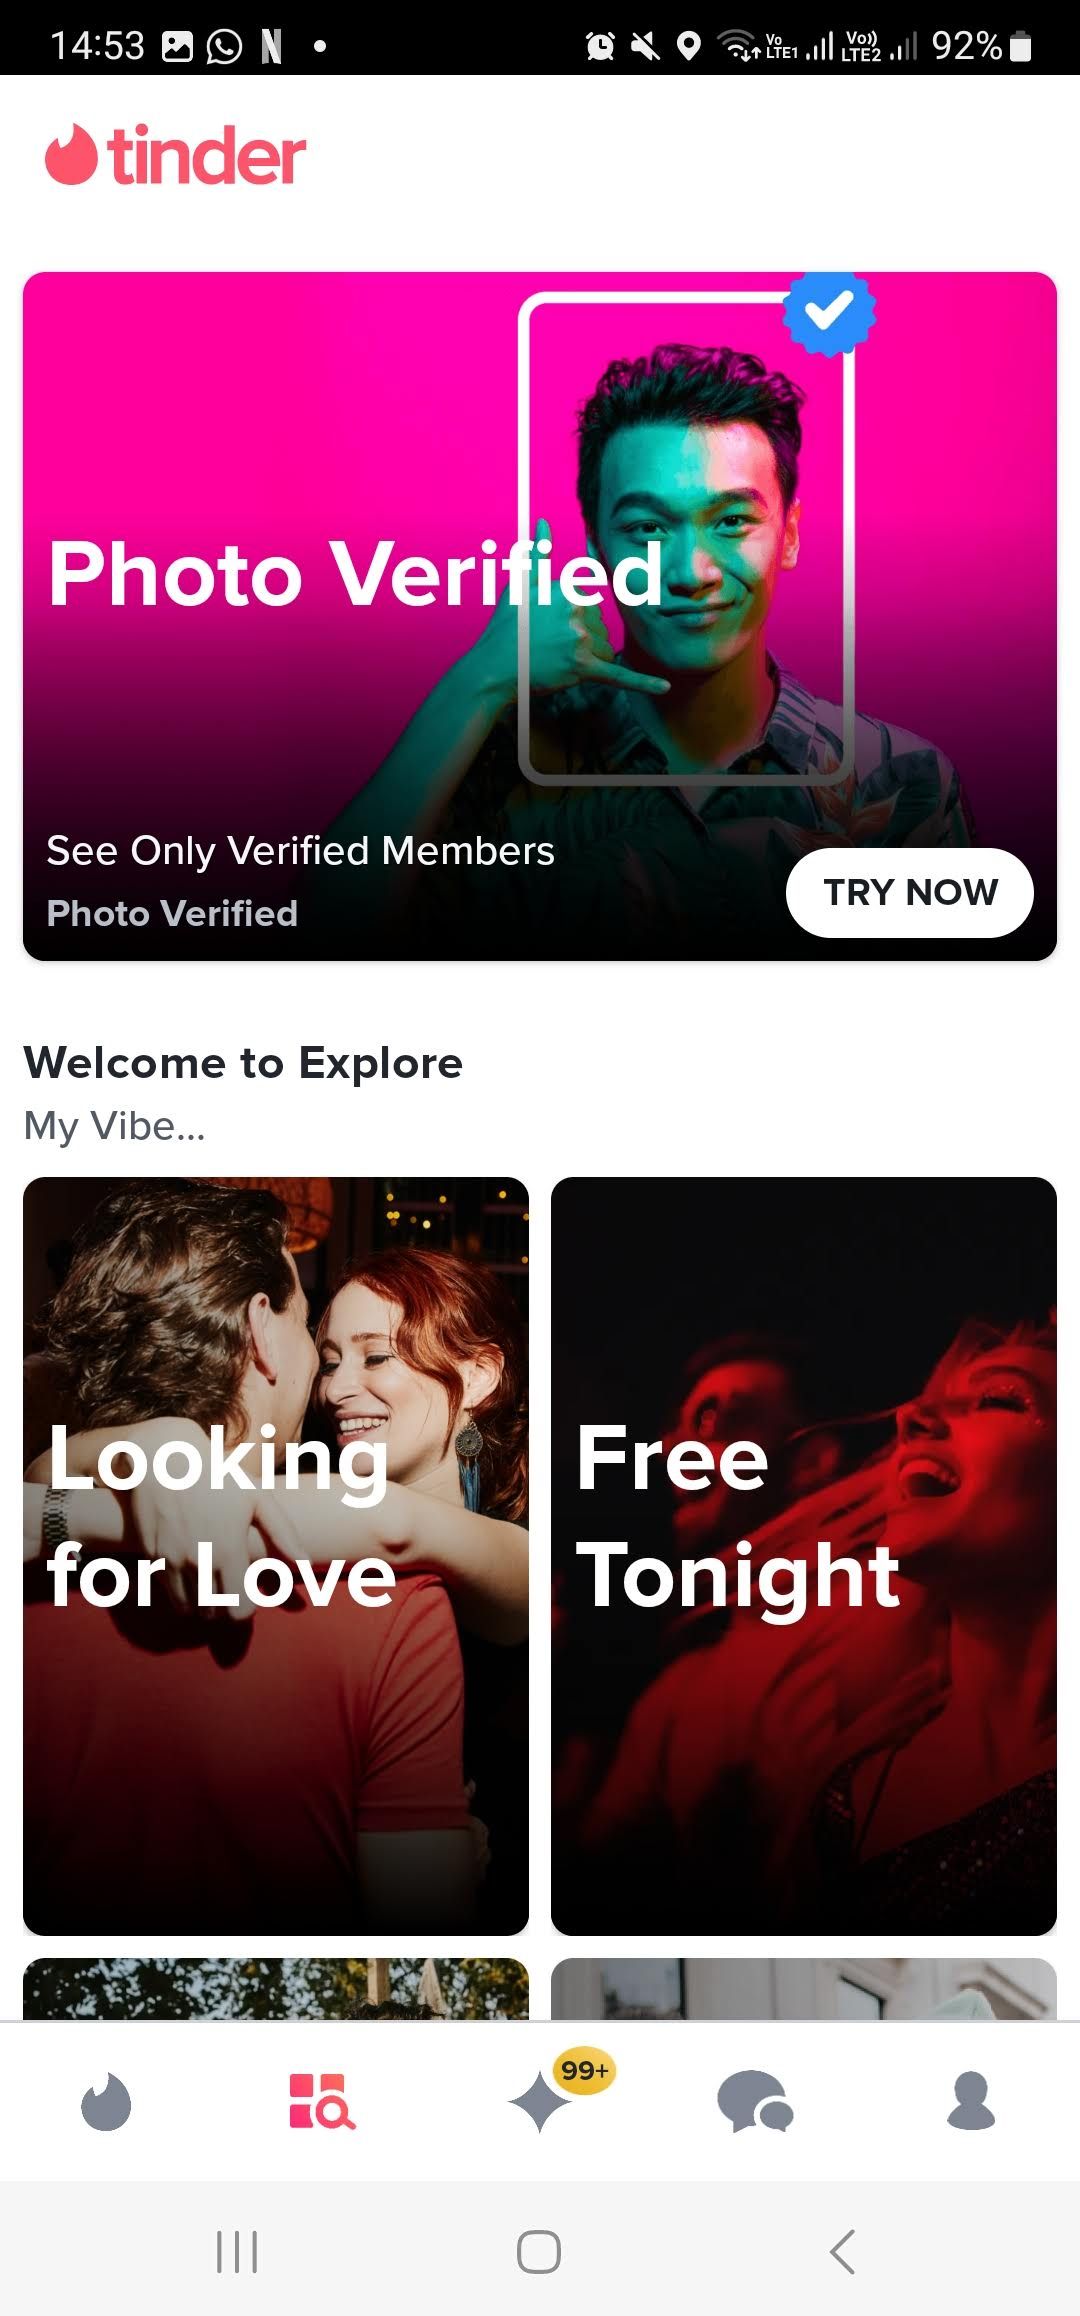 tinder explore page with photo verified filter